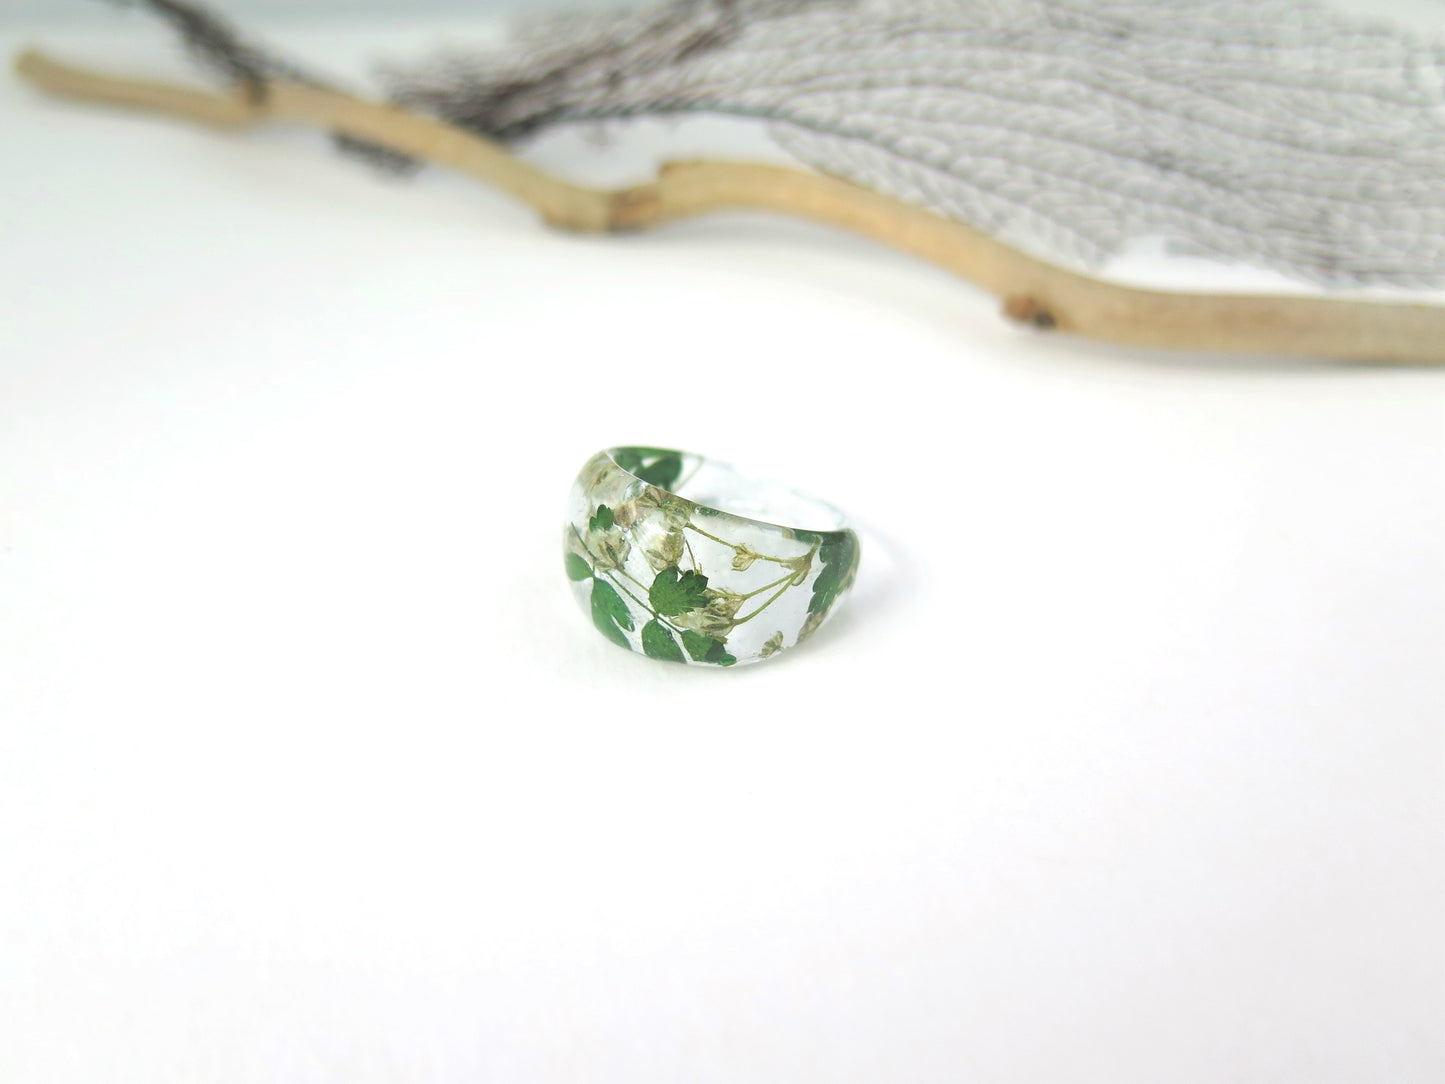 Botanical ring, Nature ring, Pressed flower jewelry, Green ring